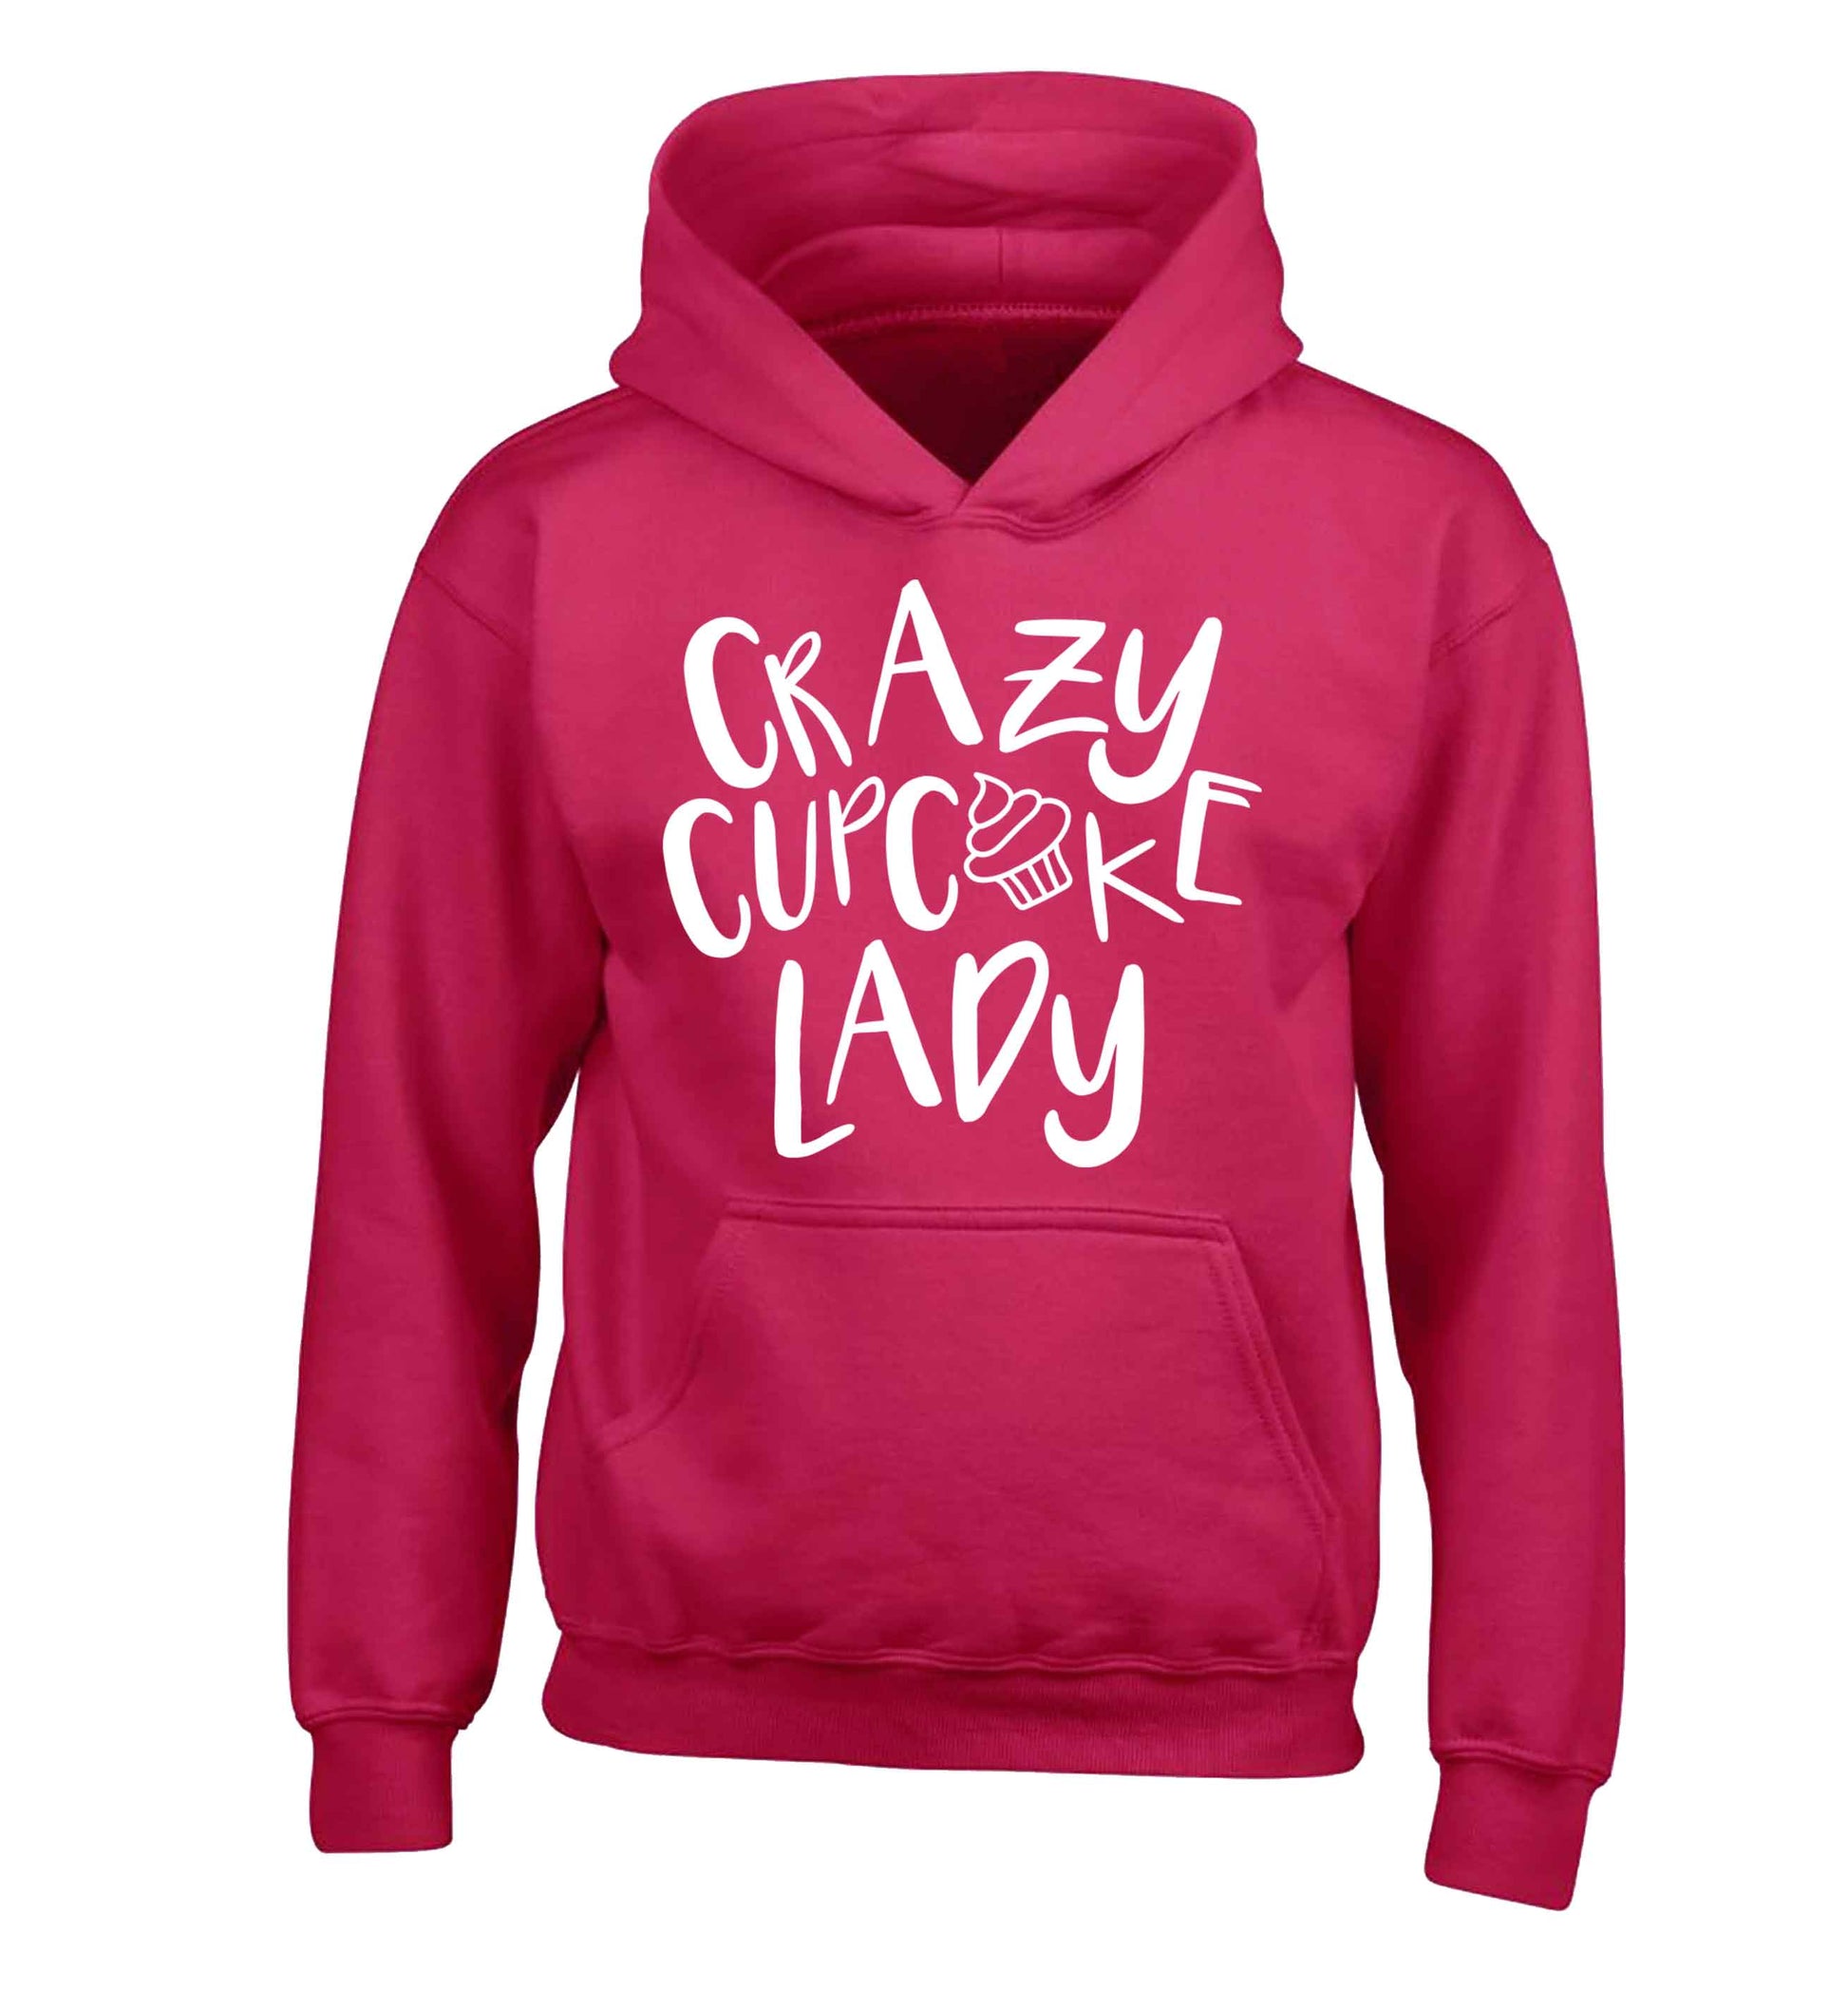 Crazy cupcake lady children's pink hoodie 12-13 Years